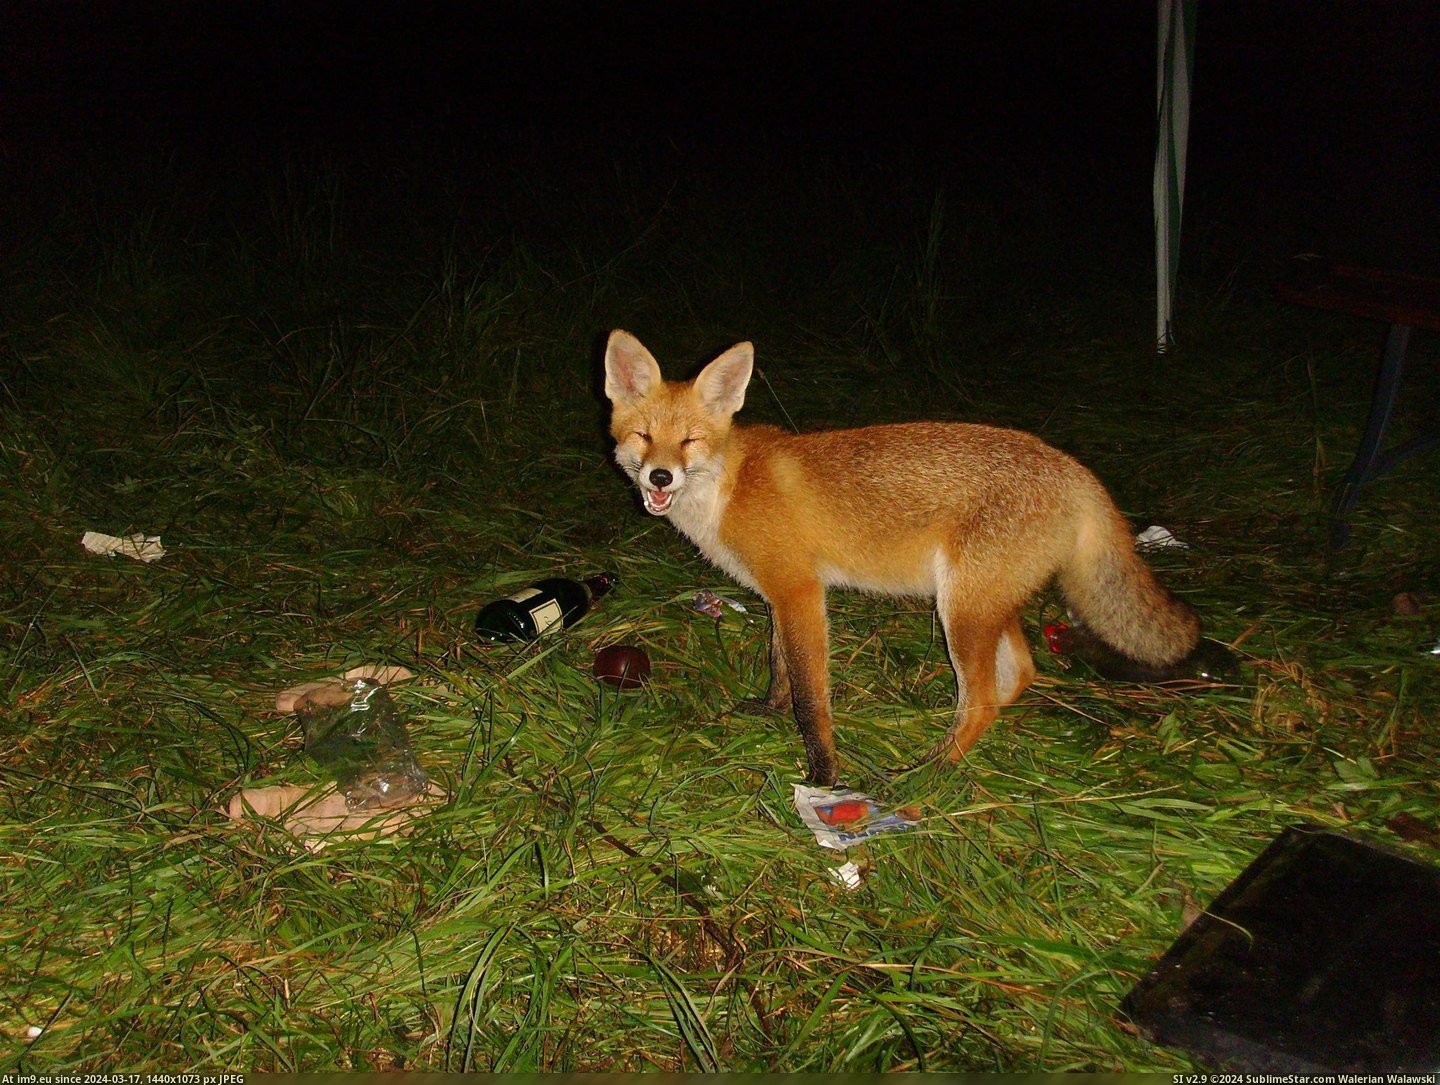 #Happy #Night #Long #Appears #Campfire #Partying #Fox #Hanging #Suddenly [Aww] After a long night of partying, hanging around the campfire, when suddenly Happy Fox appears. Pic. (Image of album My r/AWW favs))